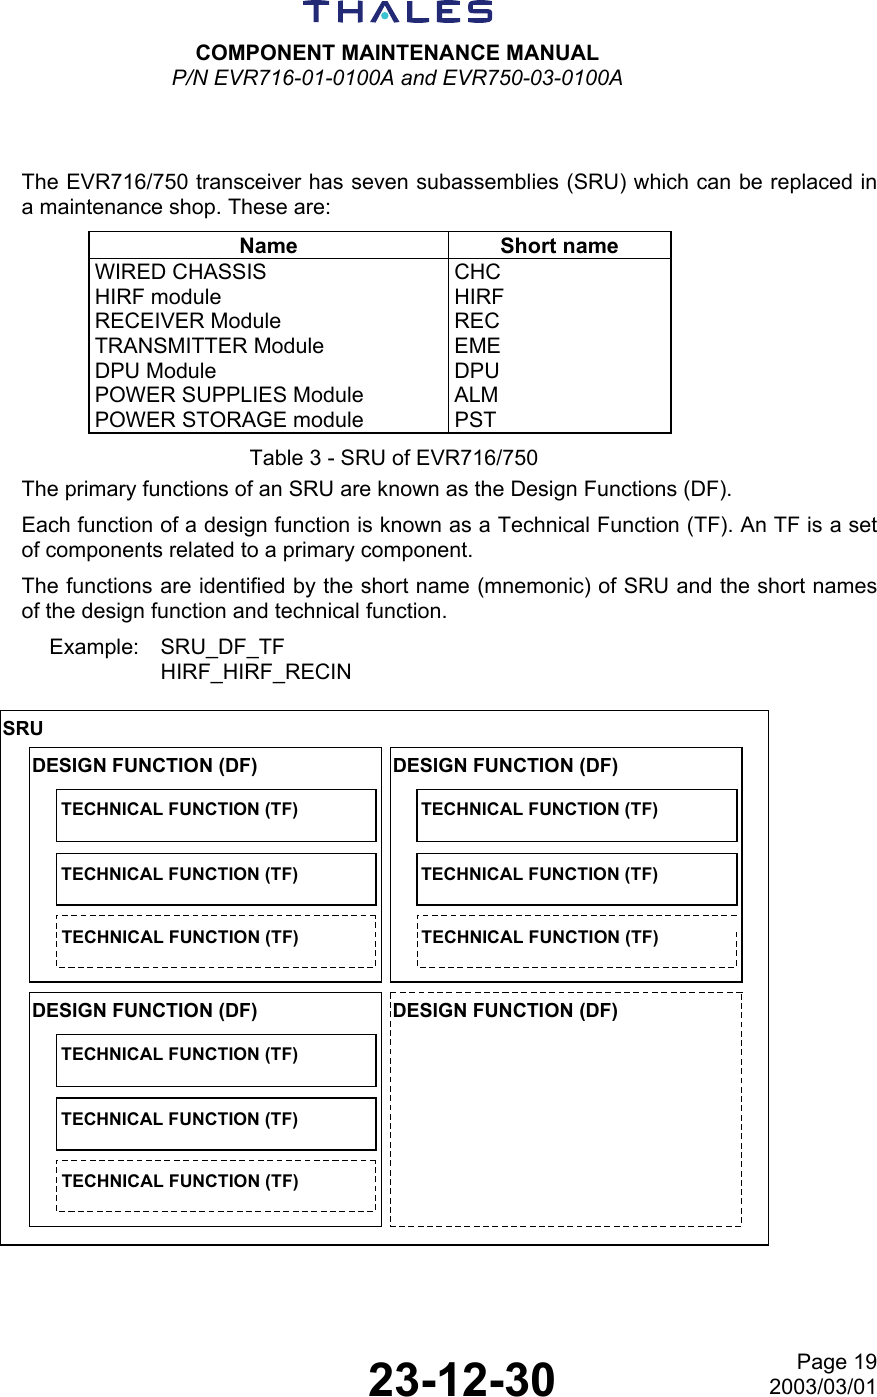  COMPONENT MAINTENANCE MANUAL P/N EVR716-01-0100A and EVR750-03-0100A   23-12-30 Page 192003/03/01   The EVR716/750 transceiver has seven subassemblies (SRU) which can be replaced in a maintenance shop. These are: Name Short name WIRED CHASSIS  CHC HIRF module  HIRF RECEIVER Module  REC TRANSMITTER Module  EME DPU Module  DPU POWER SUPPLIES Module  ALM POWER STORAGE module  PST Table 3 - SRU of EVR716/750 The primary functions of an SRU are known as the Design Functions (DF). Each function of a design function is known as a Technical Function (TF). An TF is a set of components related to a primary component. The functions are identified by the short name (mnemonic) of SRU and the short names of the design function and technical function. Example: SRU_DF_TF HIRF_HIRF_RECIN SRUDESIGN FUNCTION (DF)DESIGN FUNCTION (DF)DESIGN FUNCTION (DF)DESIGN FUNCTION (DF)TECHNICAL FUNCTION (TF)TECHNICAL FUNCTION (TF)TECHNICAL FUNCTION (TF)TECHNICAL FUNCTION (TF)TECHNICAL FUNCTION (TF)TECHNICAL FUNCTION (TF)TECHNICAL FUNCTION (TF)TECHNICAL FUNCTION (TF)TECHNICAL FUNCTION (TF) 